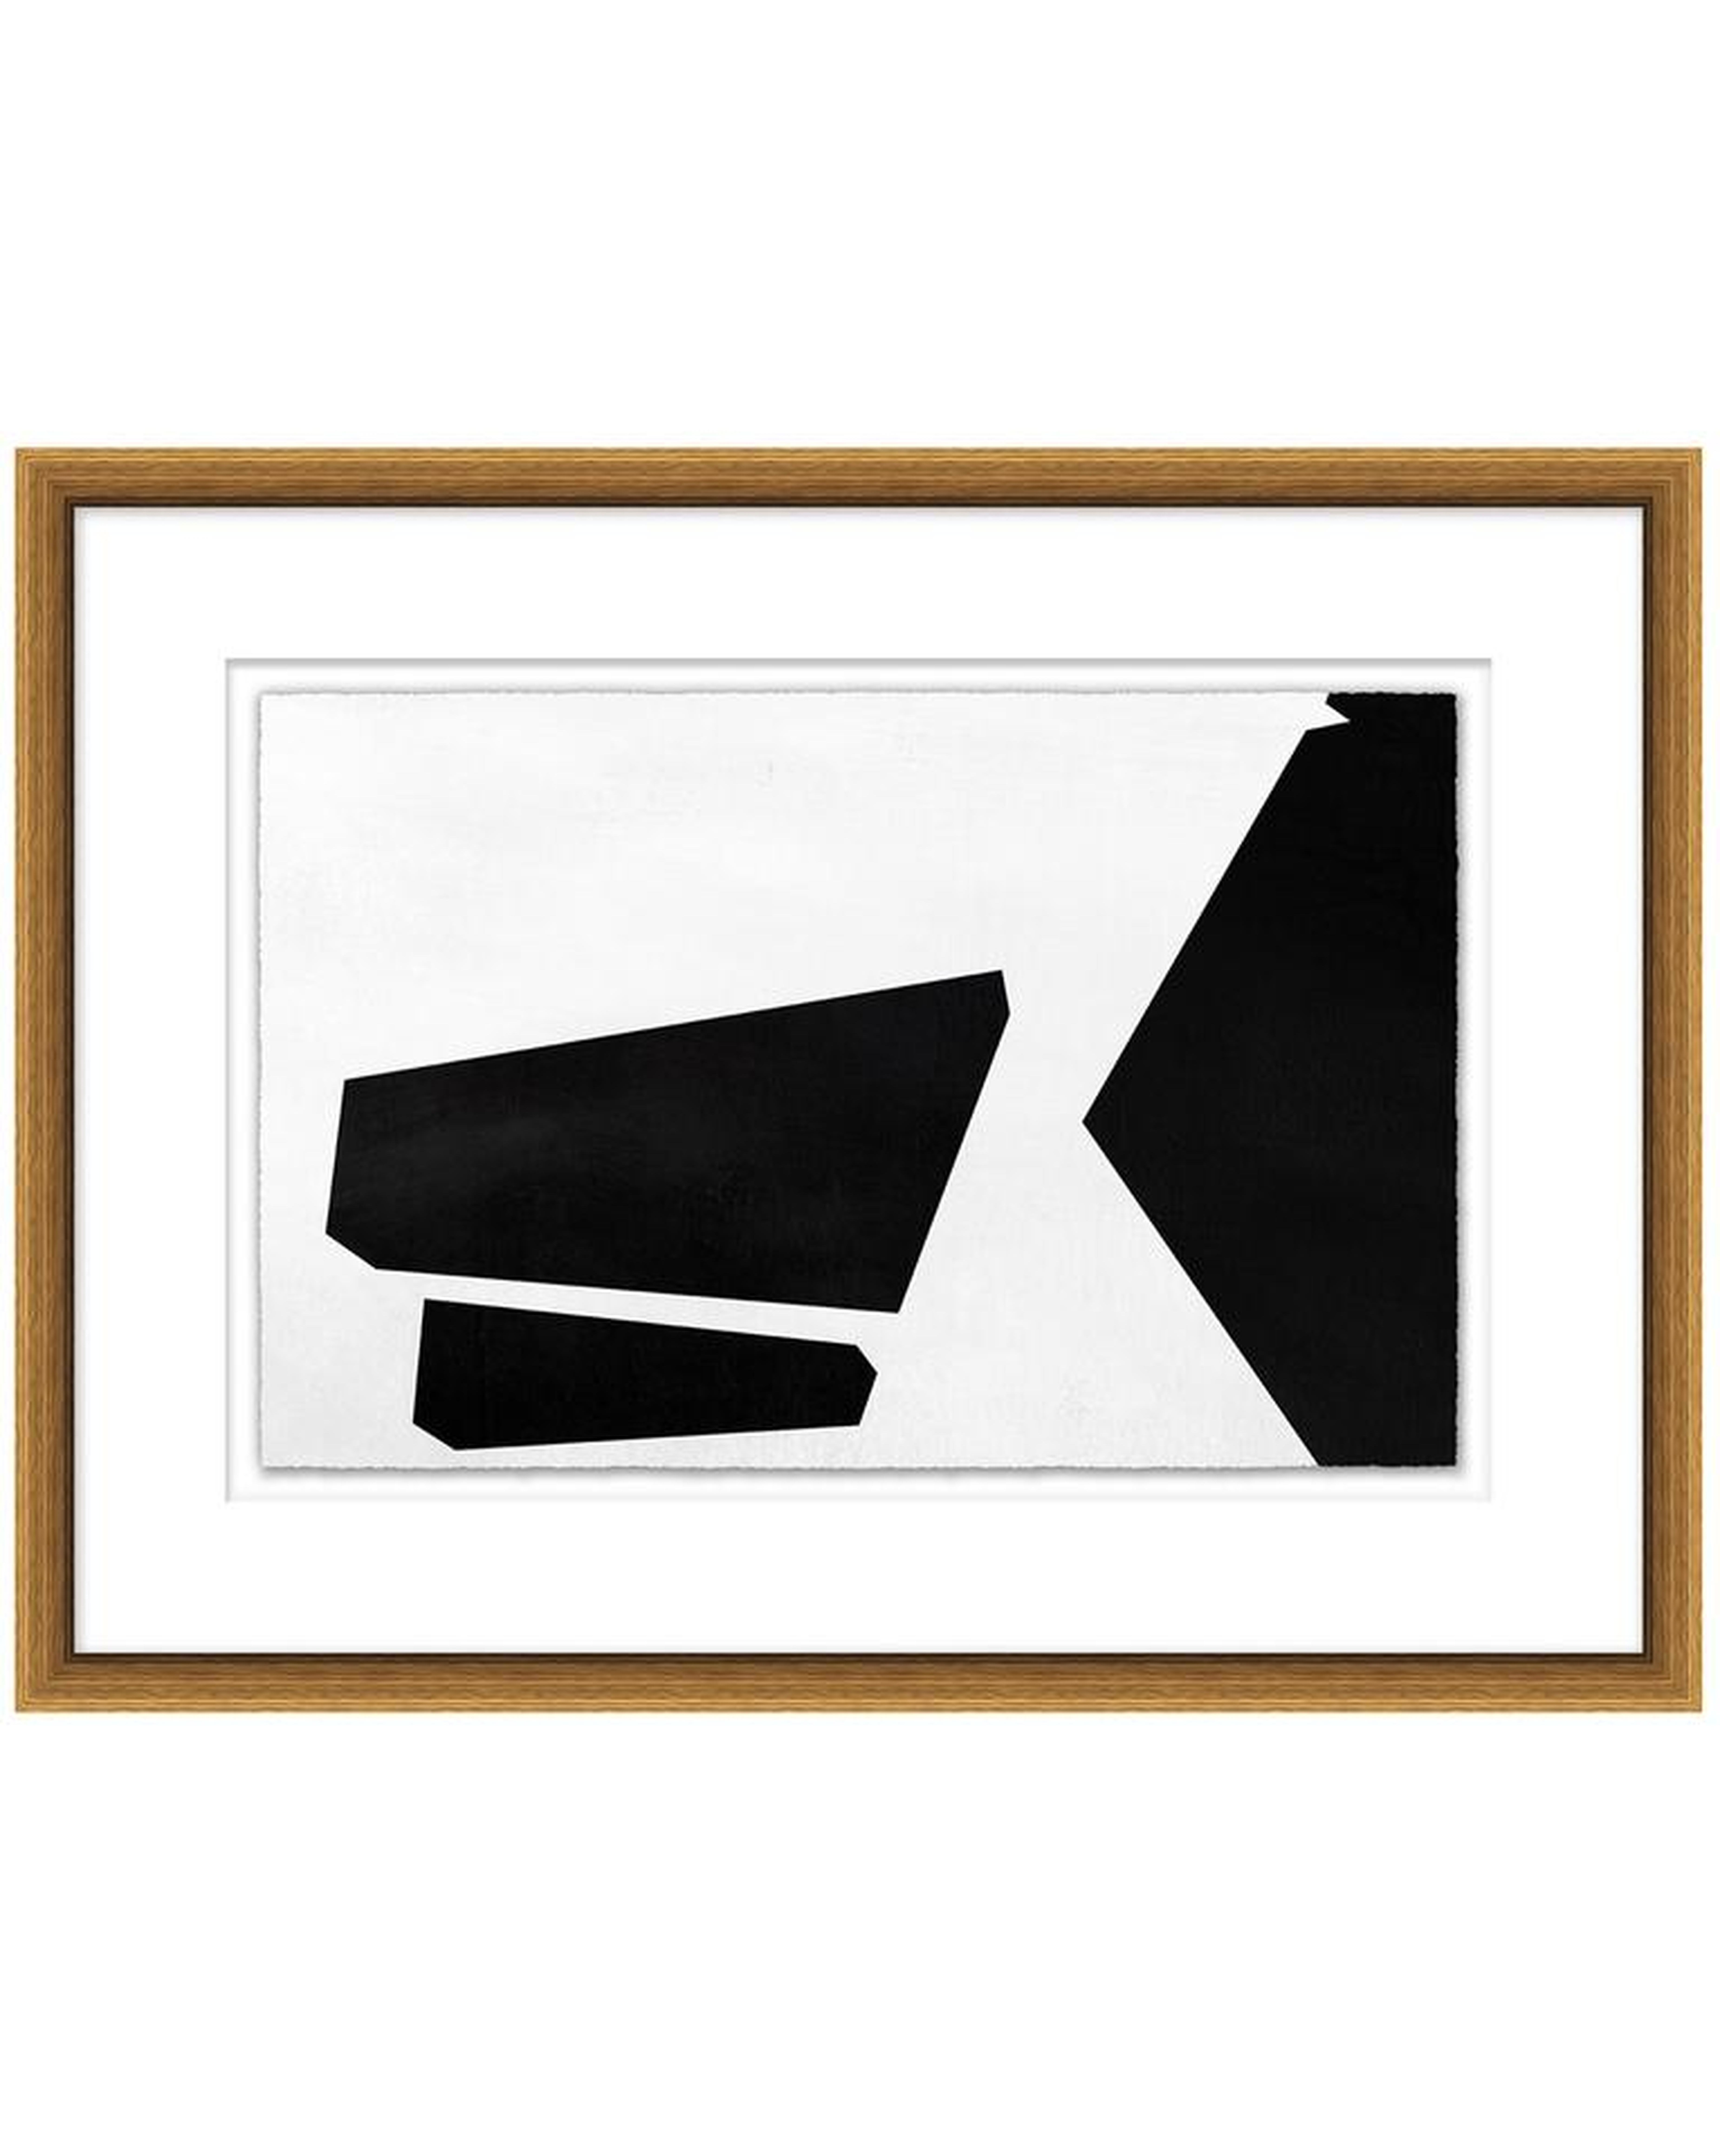 MID CENTURY SHAPES 1 Framed Art - McGee & Co.